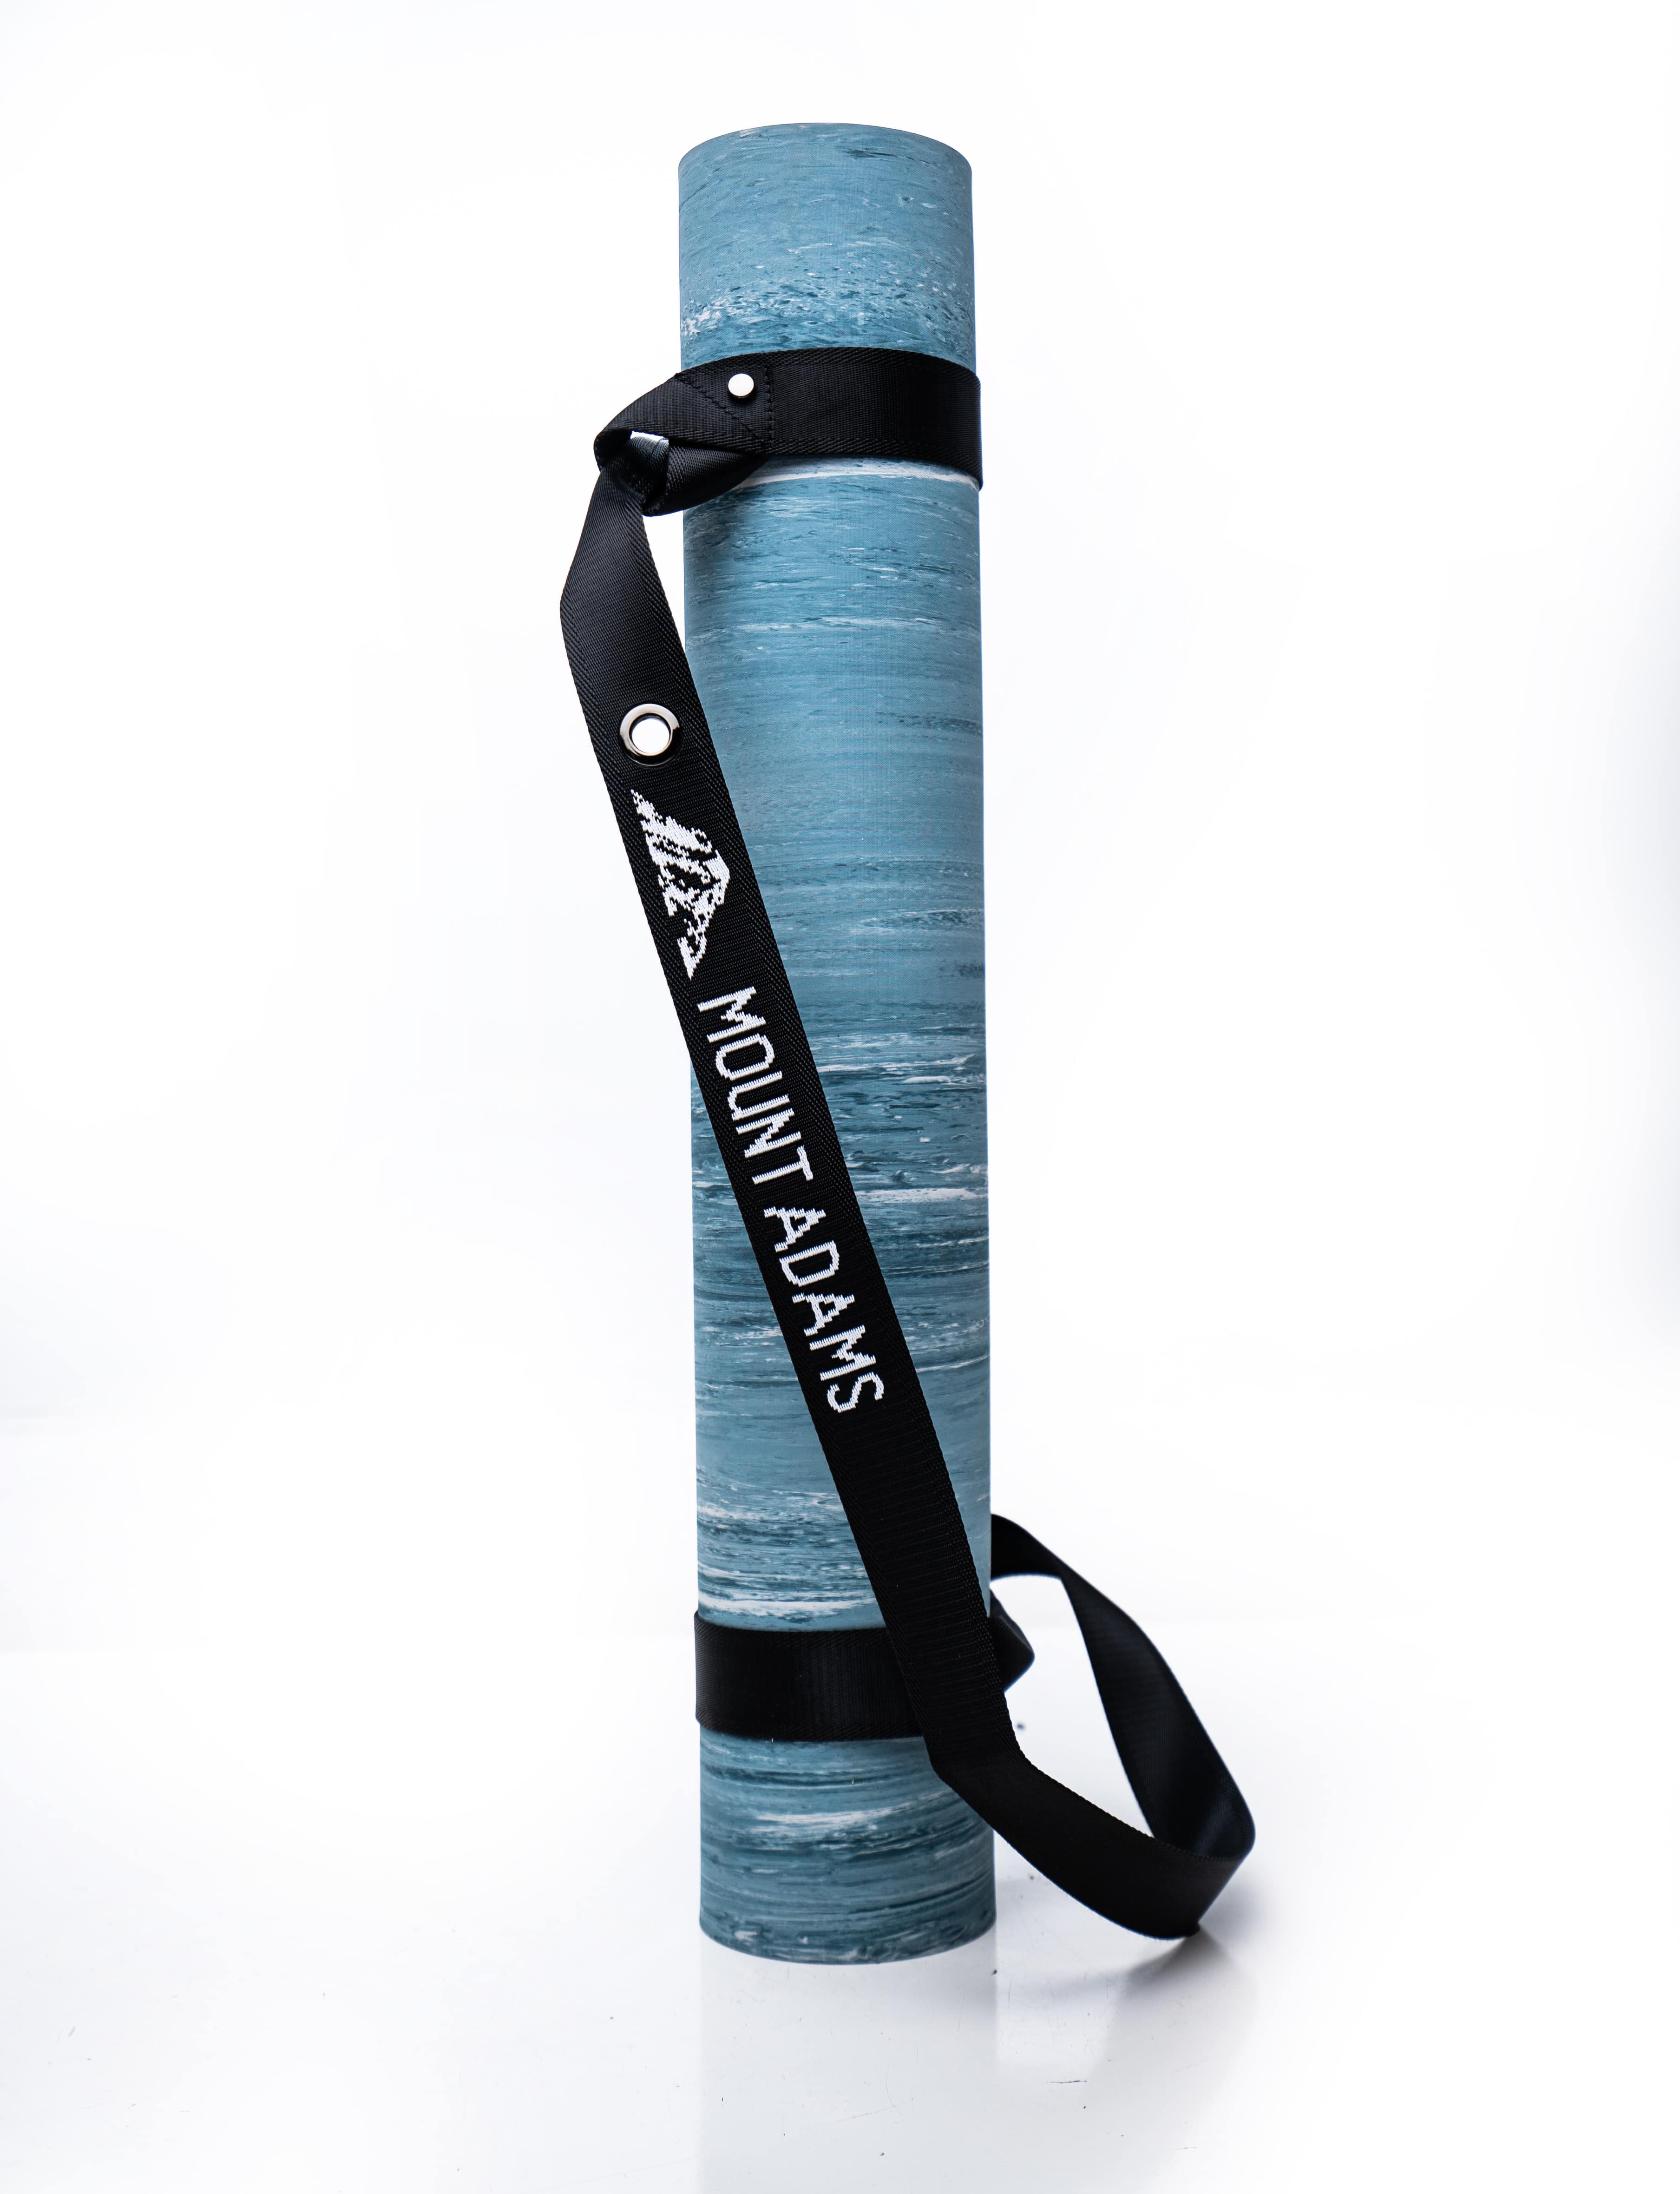 Yoga Mat Carrying Strap by Mount Adams®